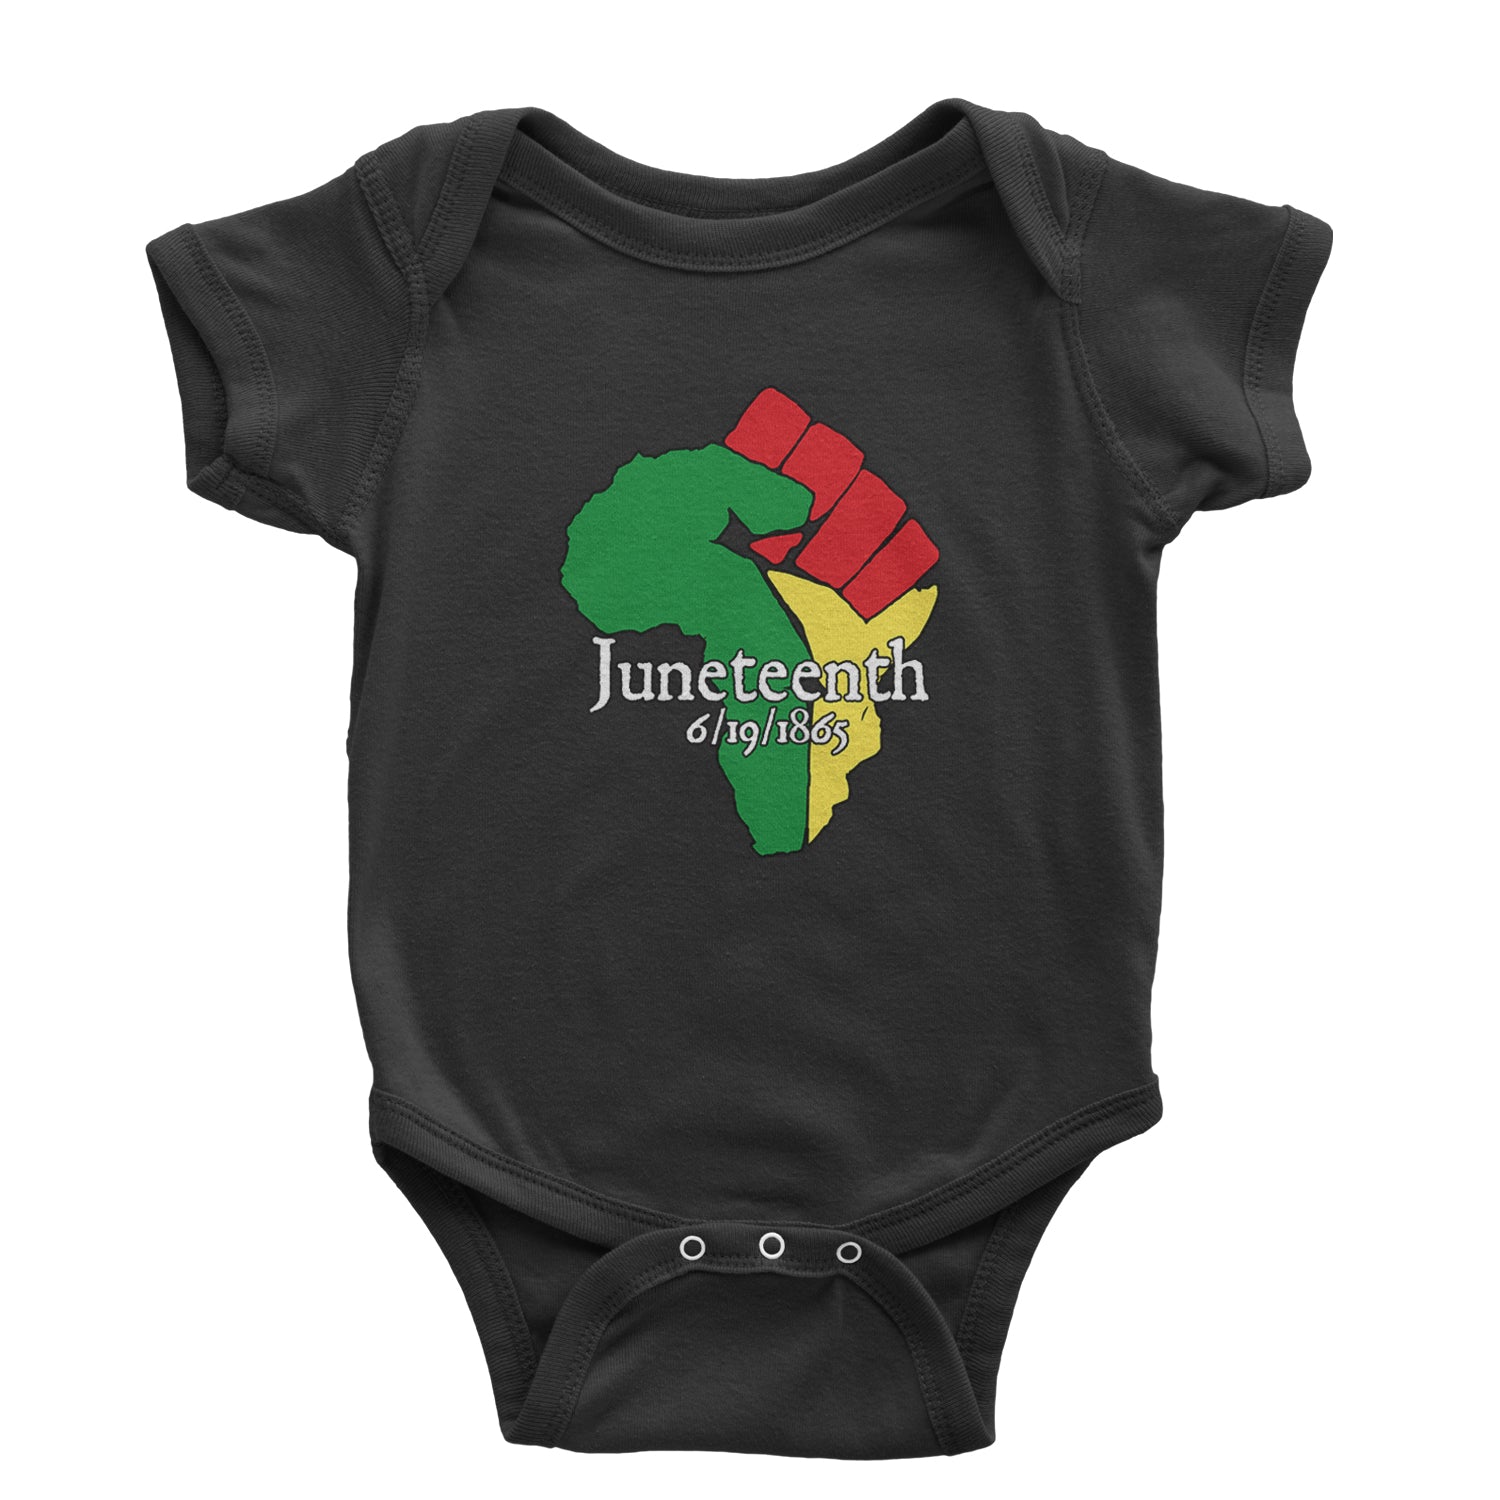 Juneteenth Raised Fist Africa Celebrate Emancipation Day Infant One-Piece Romper Bodysuit and Toddler T-shirt